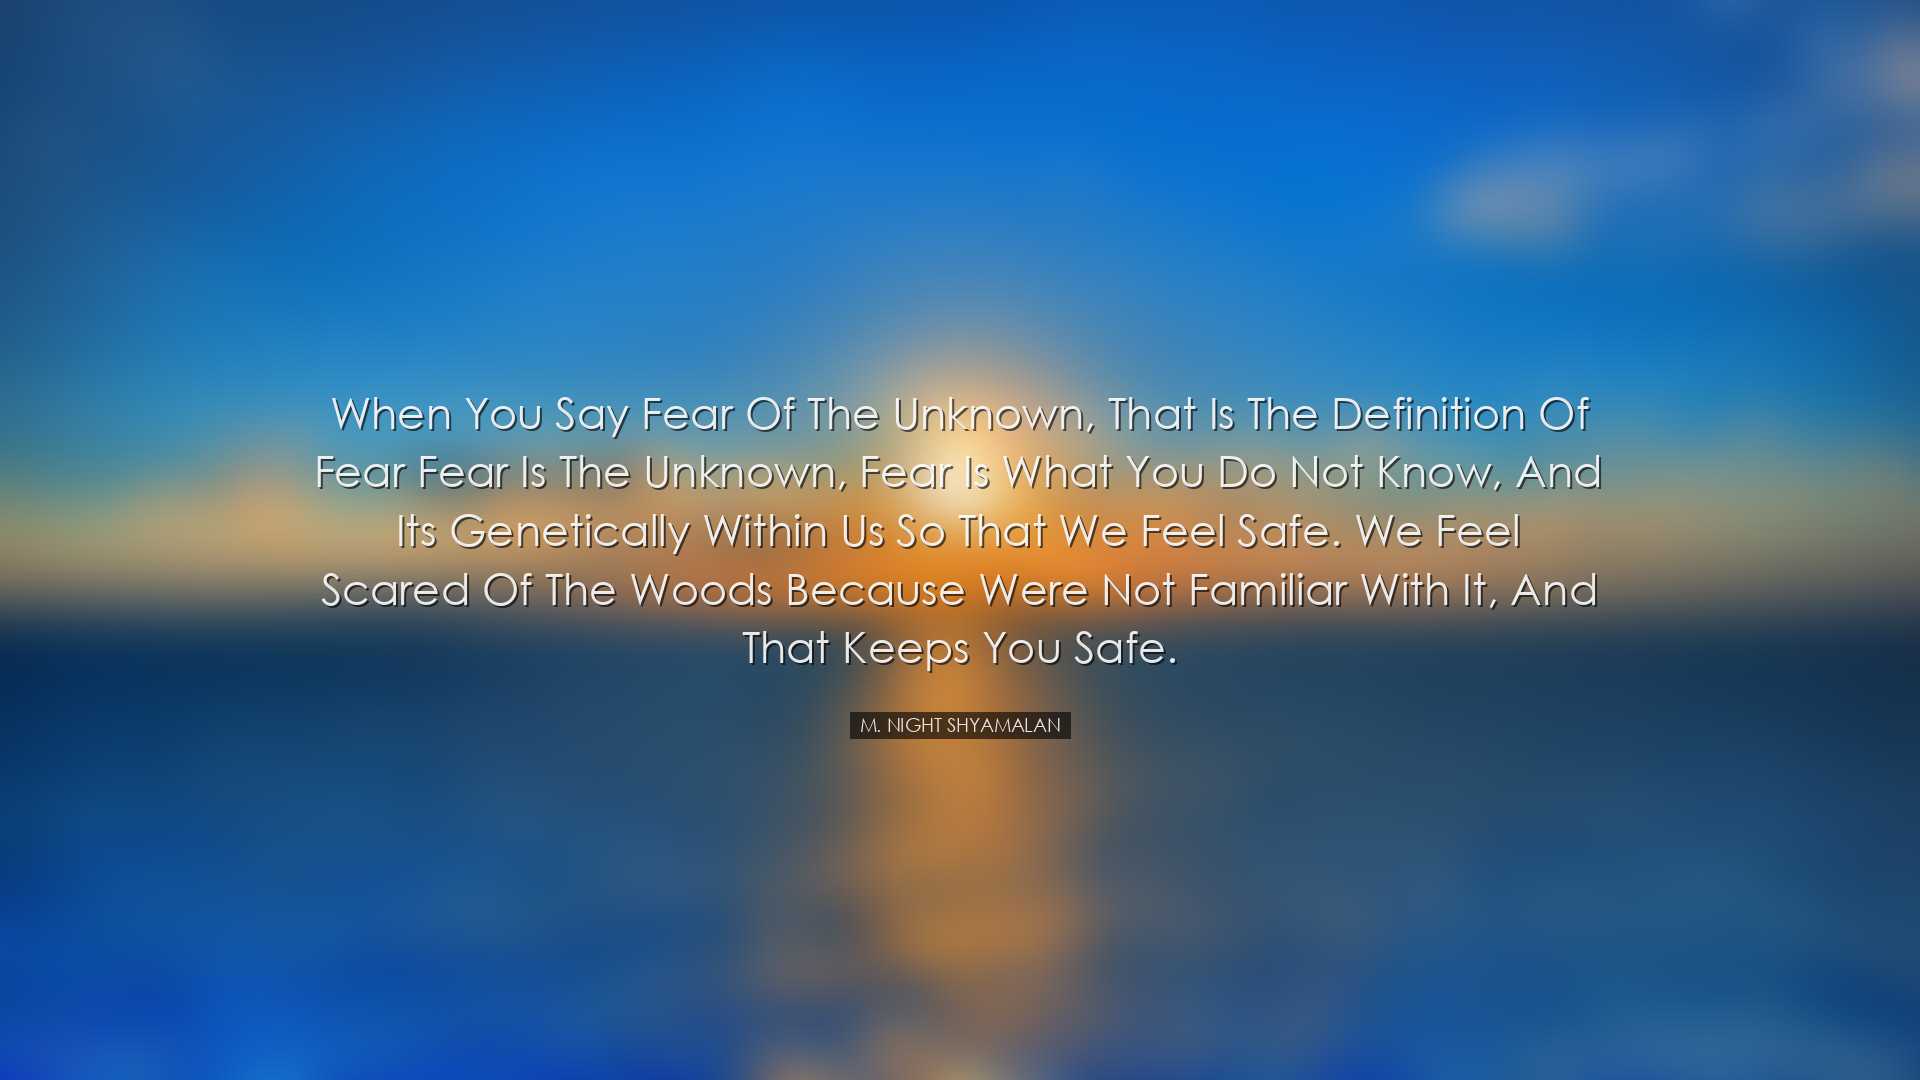 When you say fear of the unknown, that is the definition of fear f